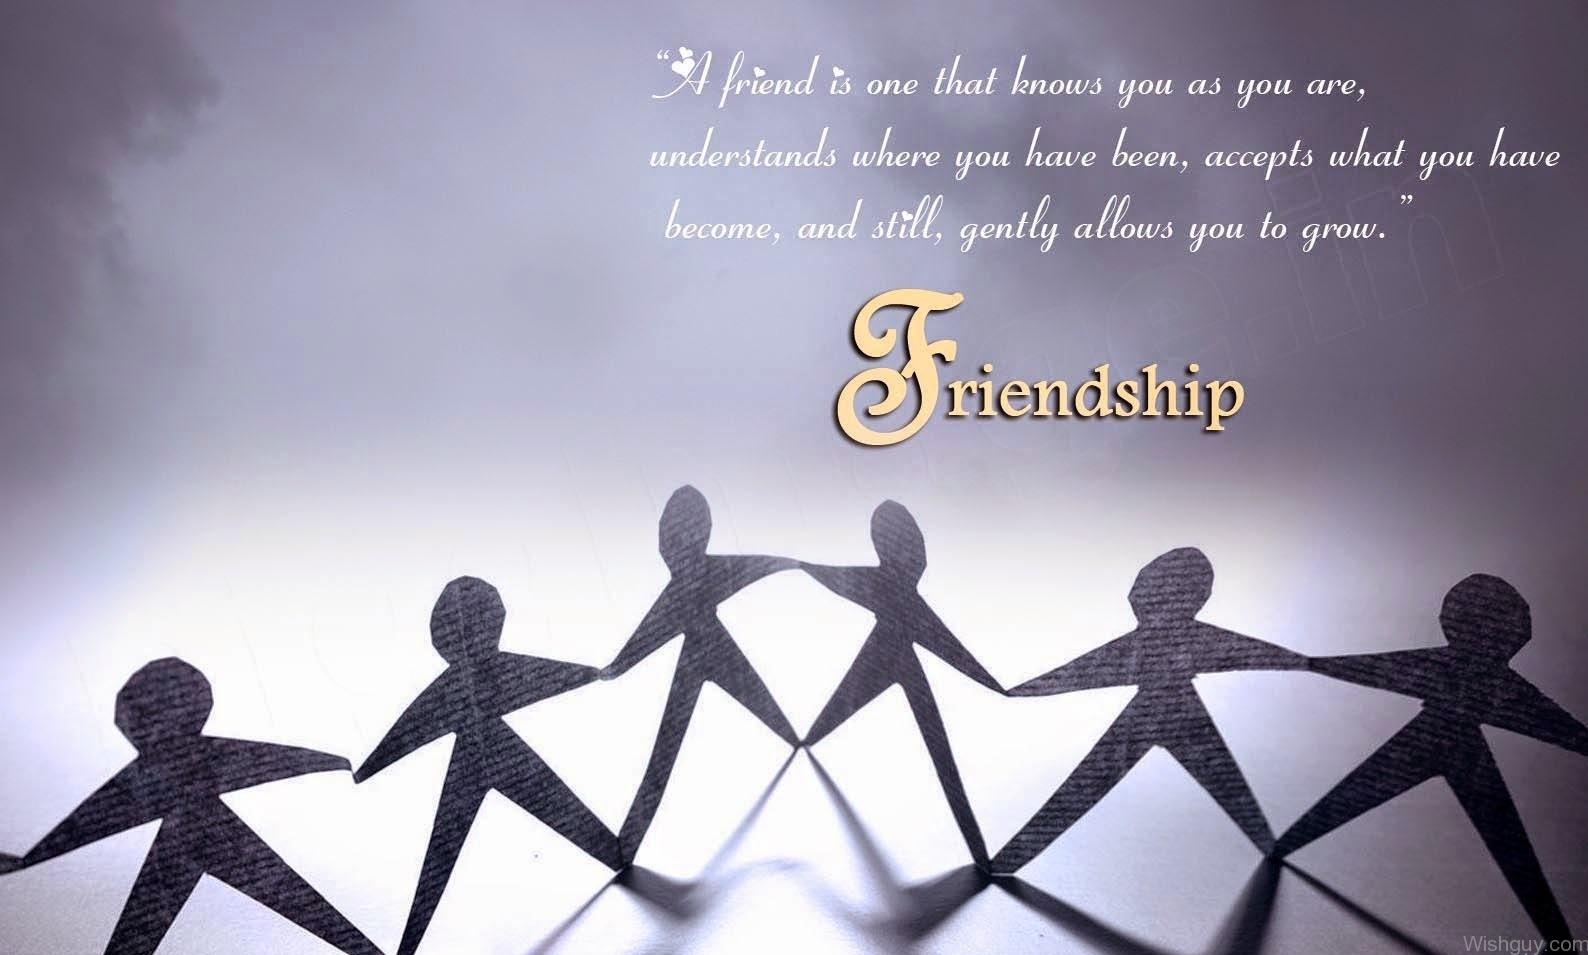 Those that the day my friend. International Friendship Day. International friends Day 9 June. Happy Friendship Day. Happy friends Day.